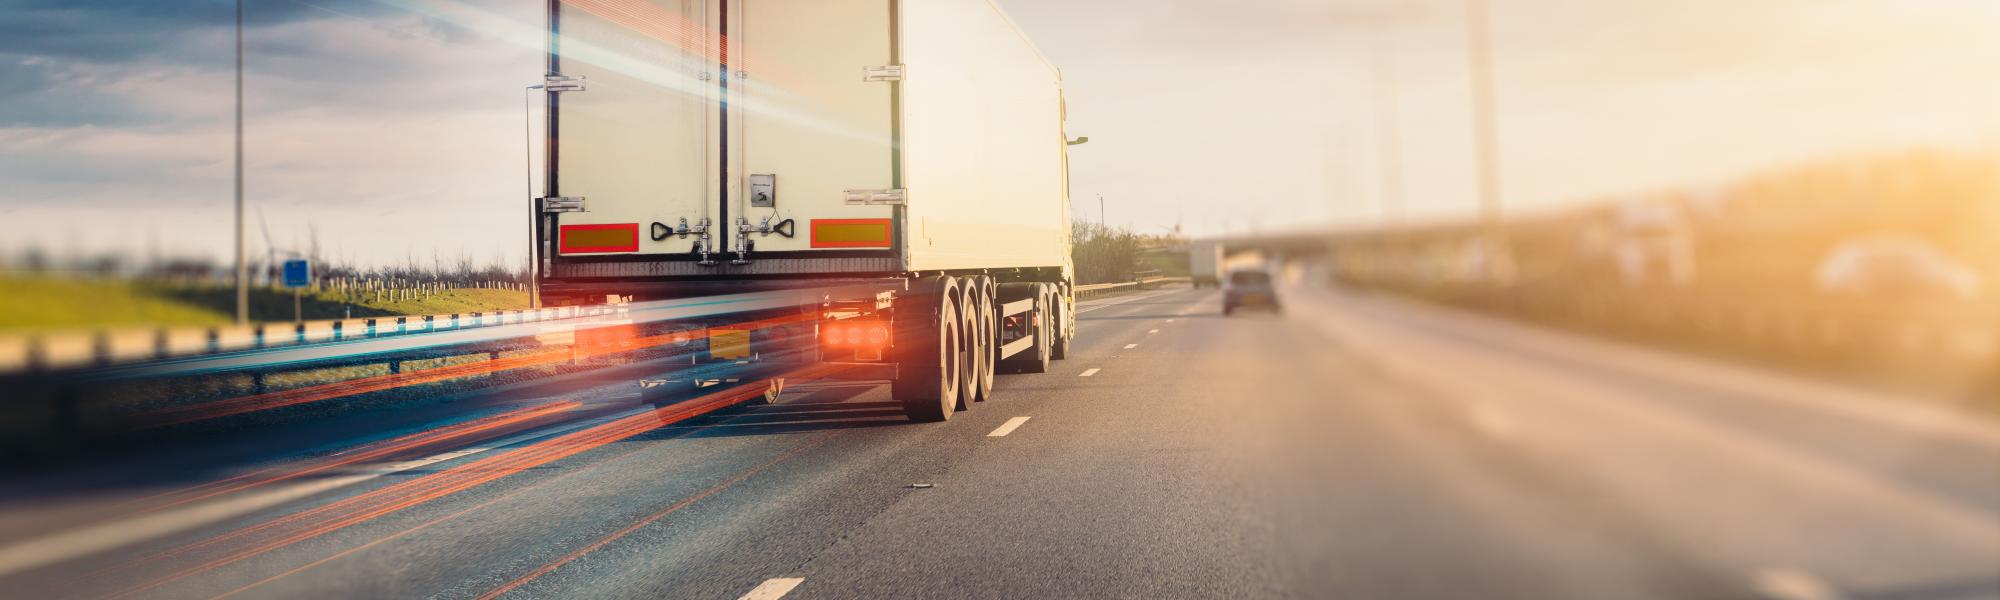 European road freight rates soften after hitting another all-time high in Q3